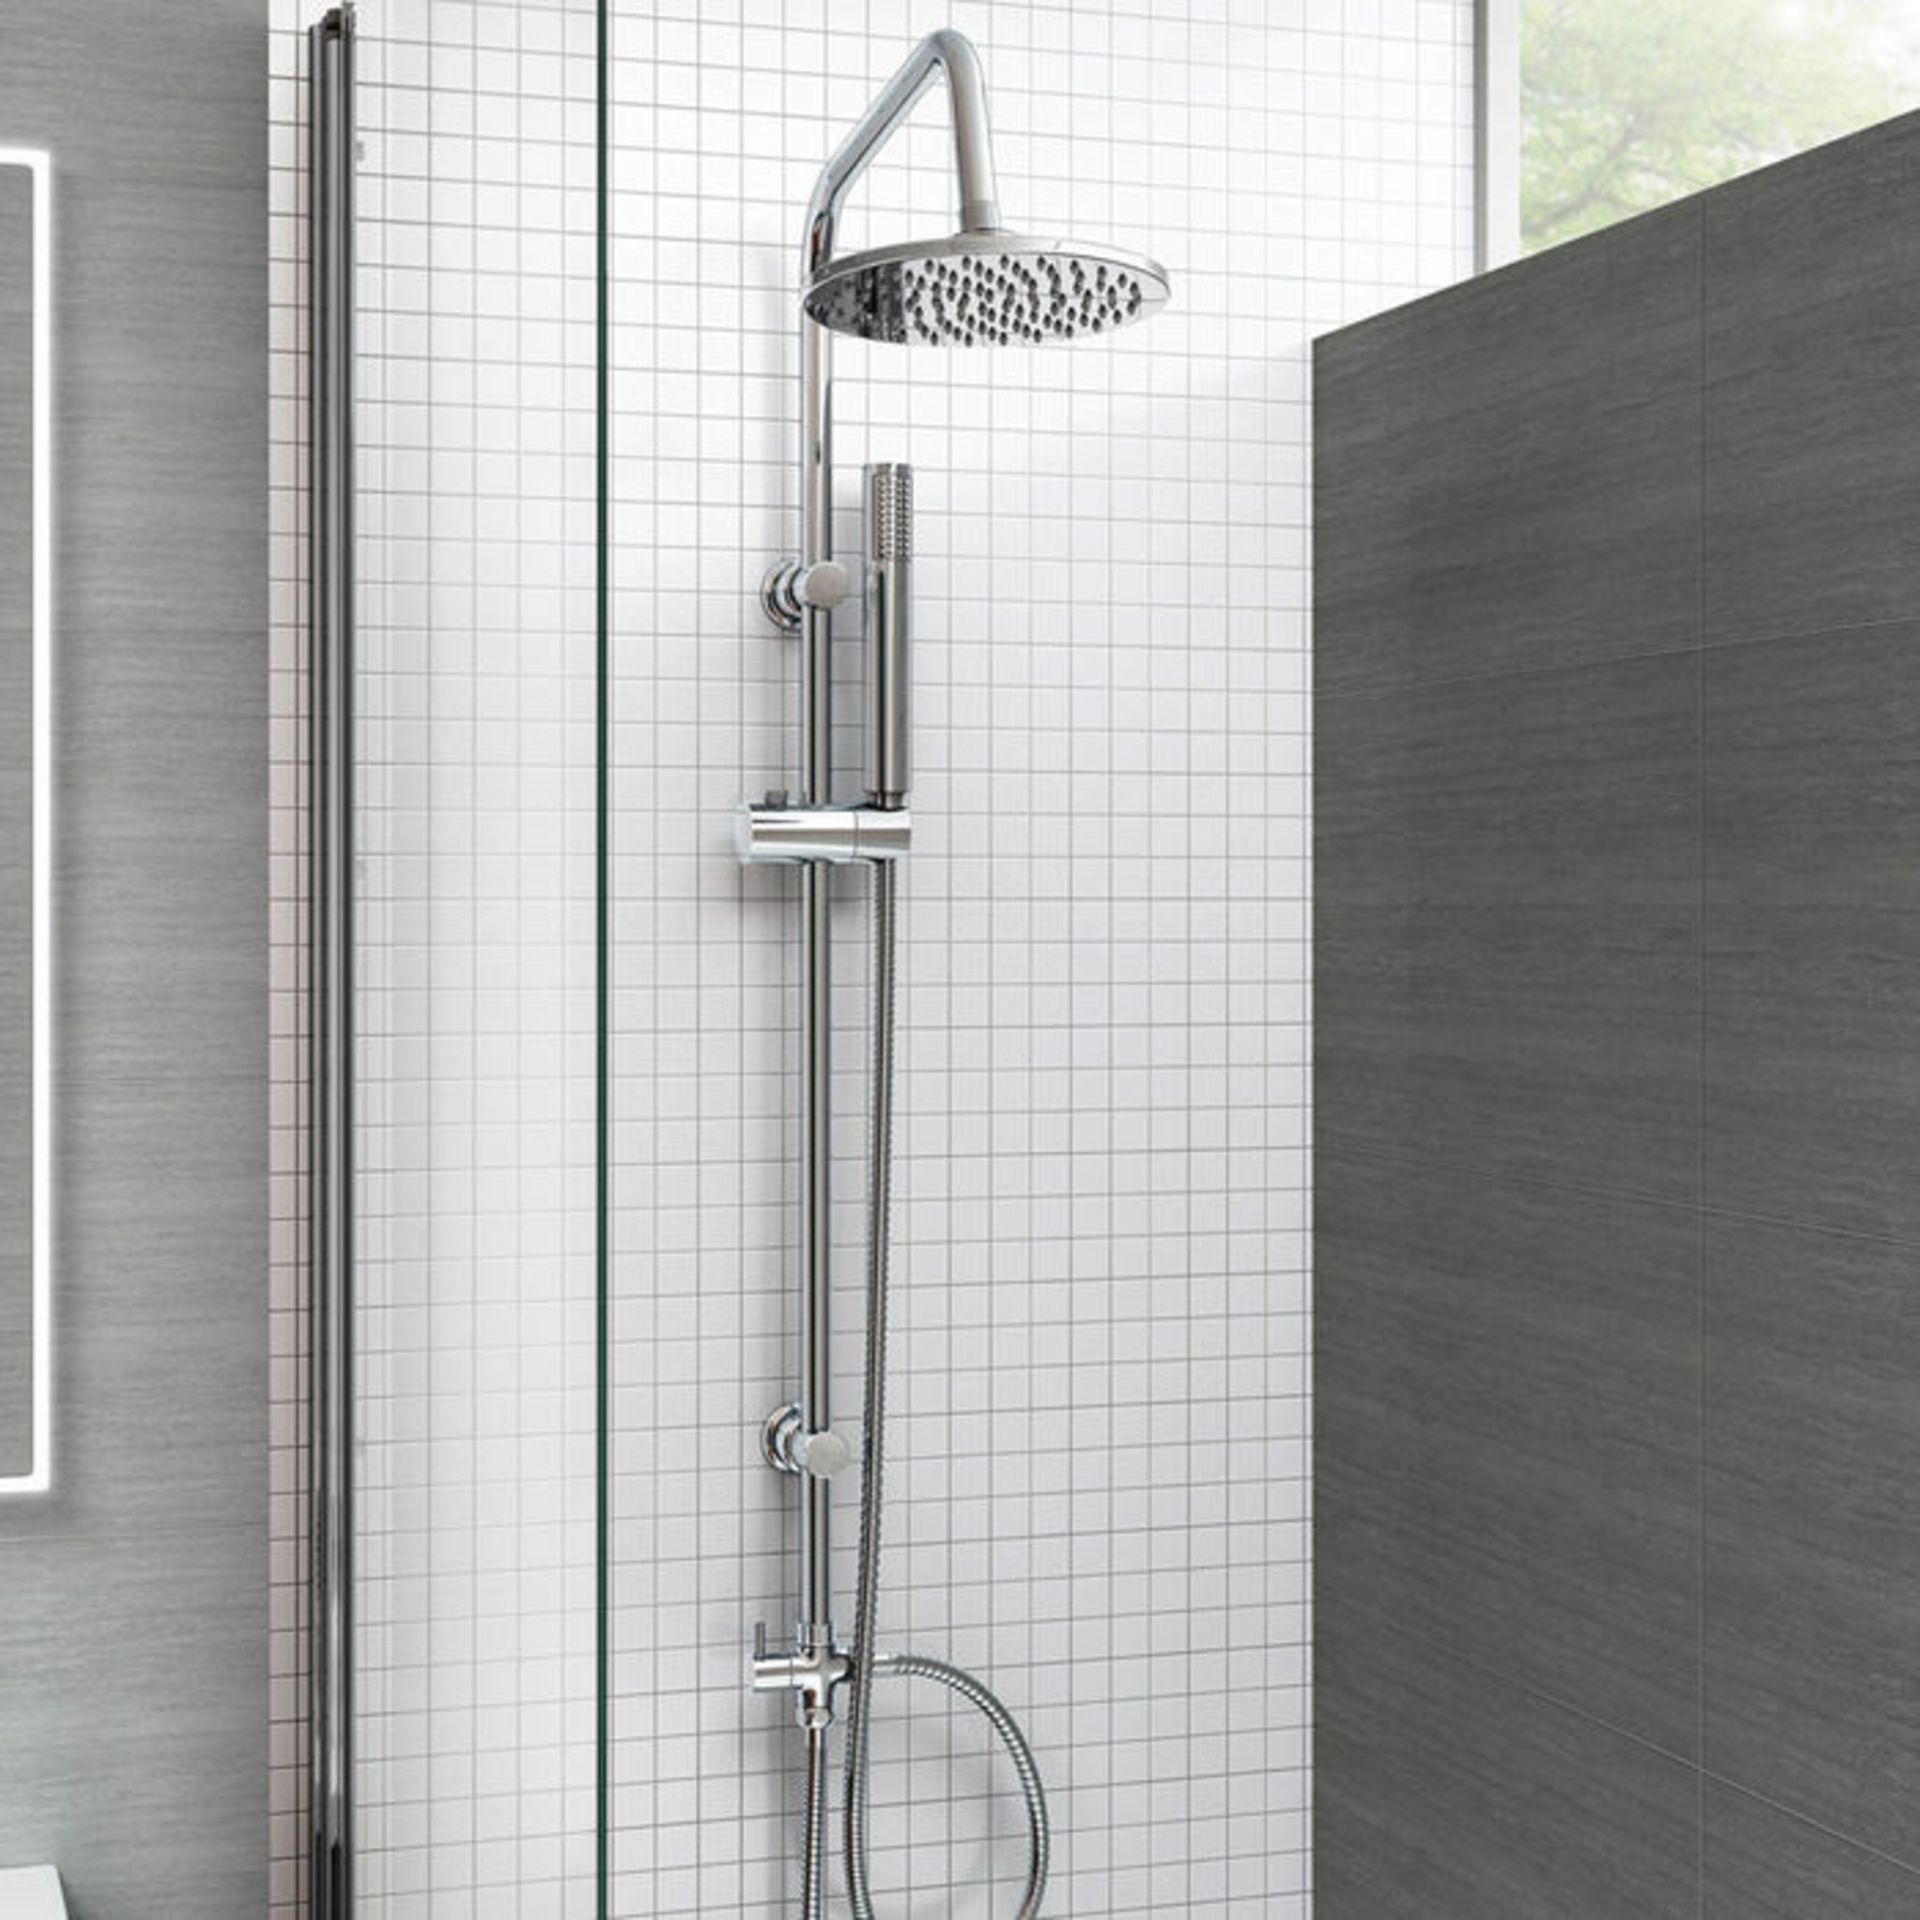 (HS39) 200mm Round Head, Riser Rail & Handheld Kit. Quality stainless steel shower head with Easy